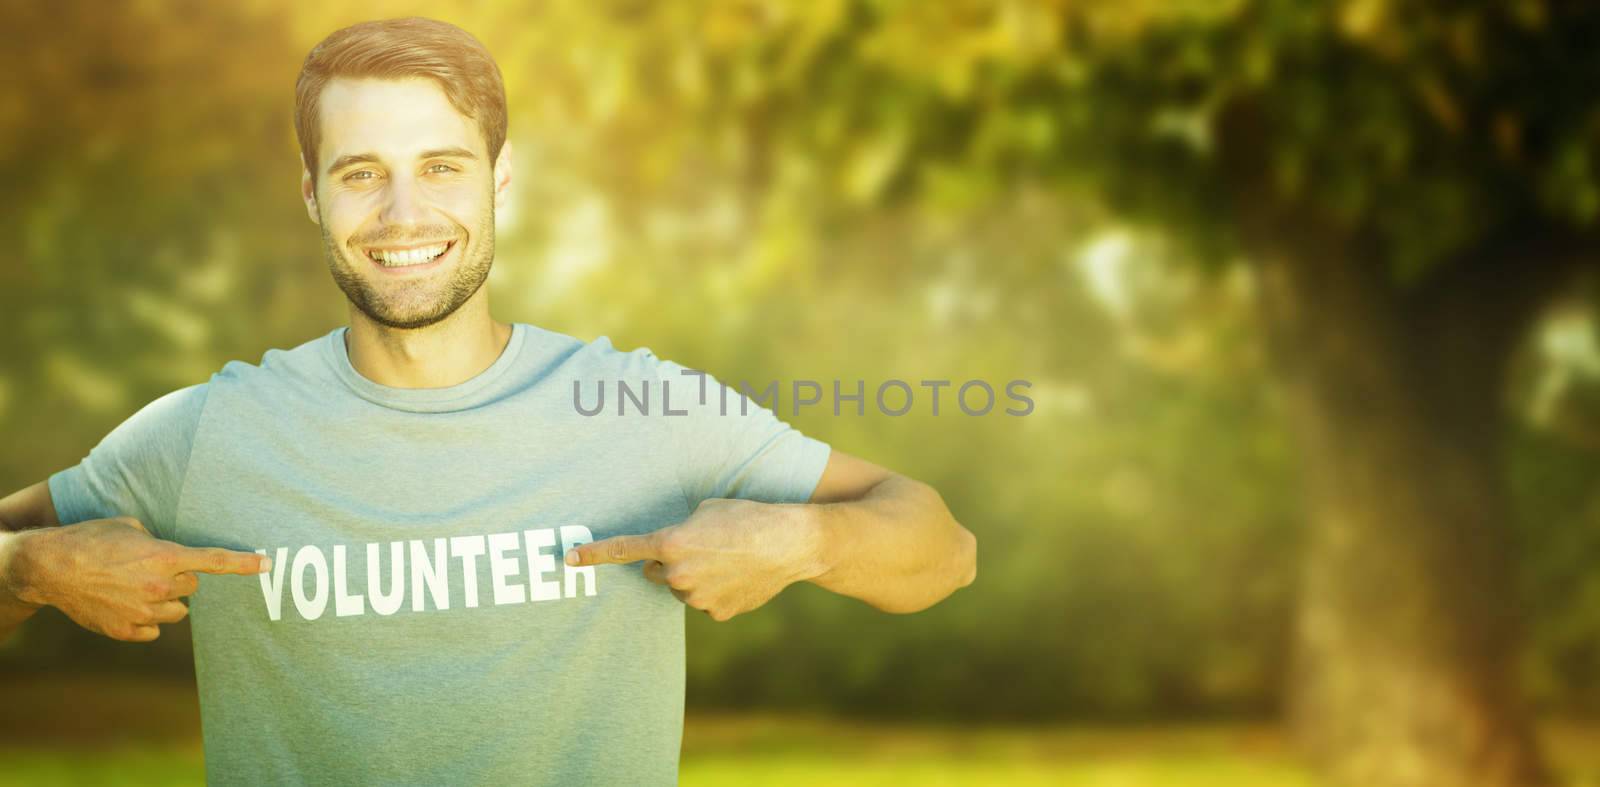 Happy volunteer in the park against trees and meadow in the park